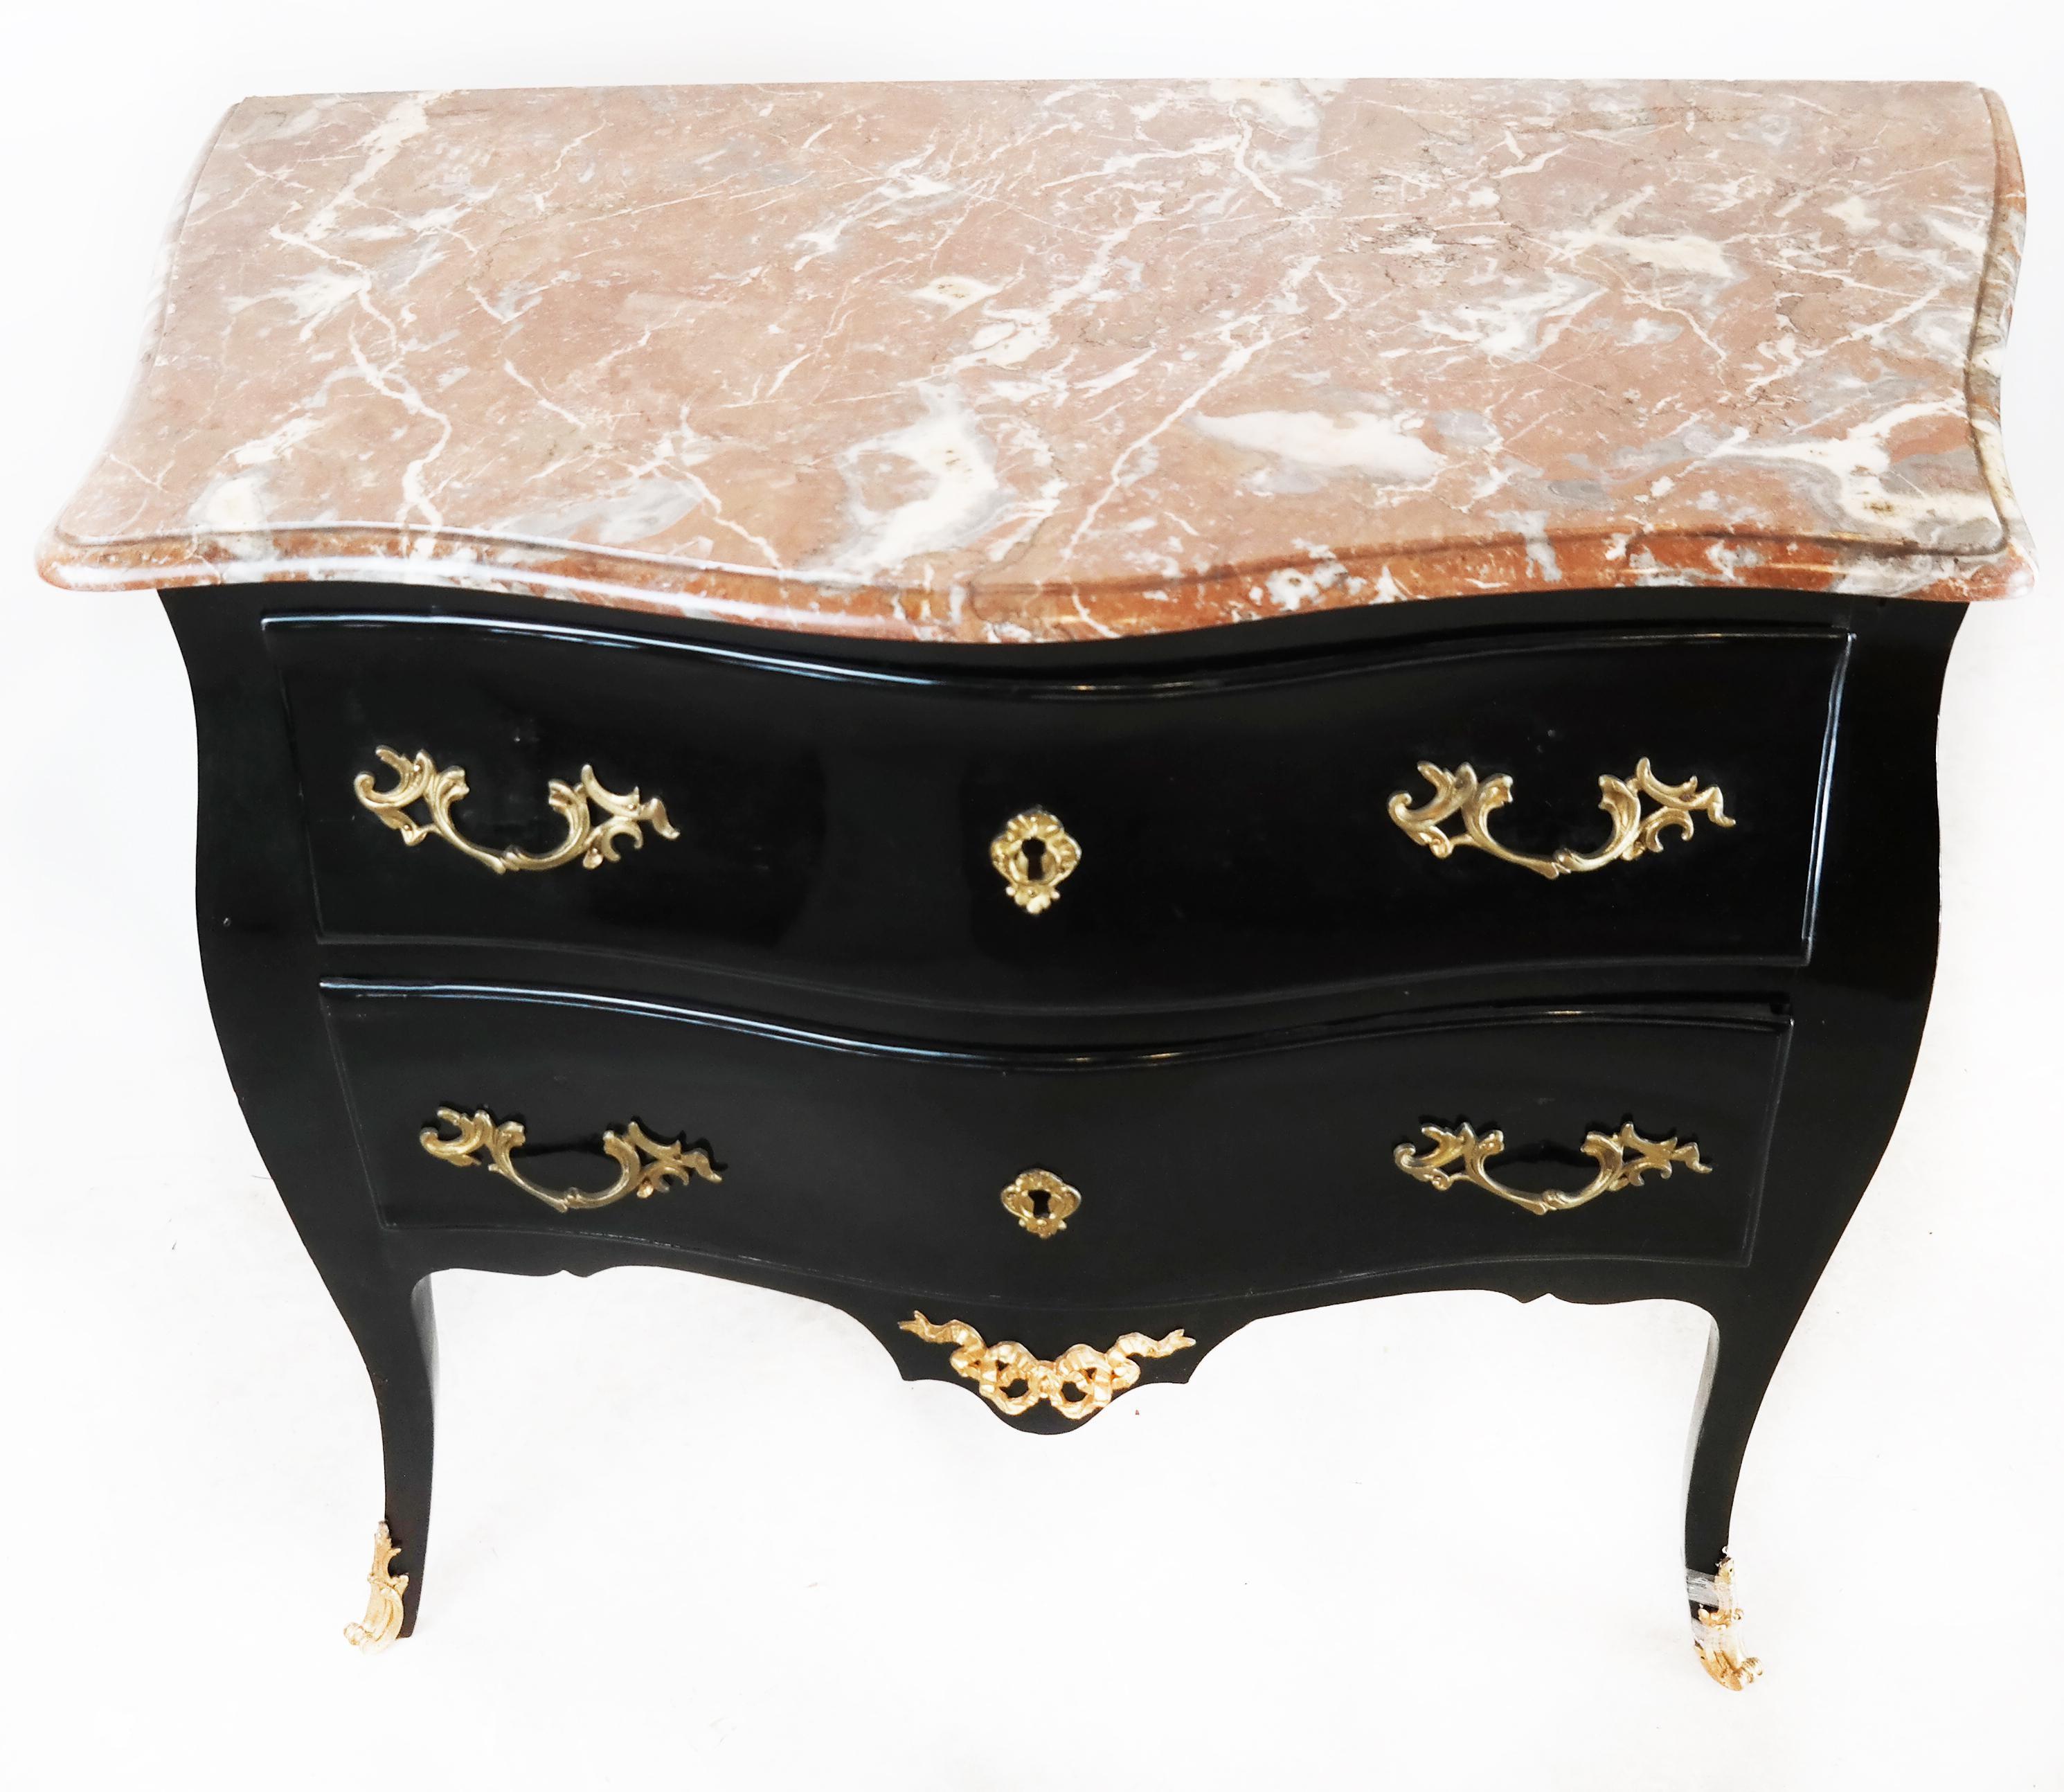 Black lacquered French bombe shape commode with brass details to drawers and feet and a coral tone marble top